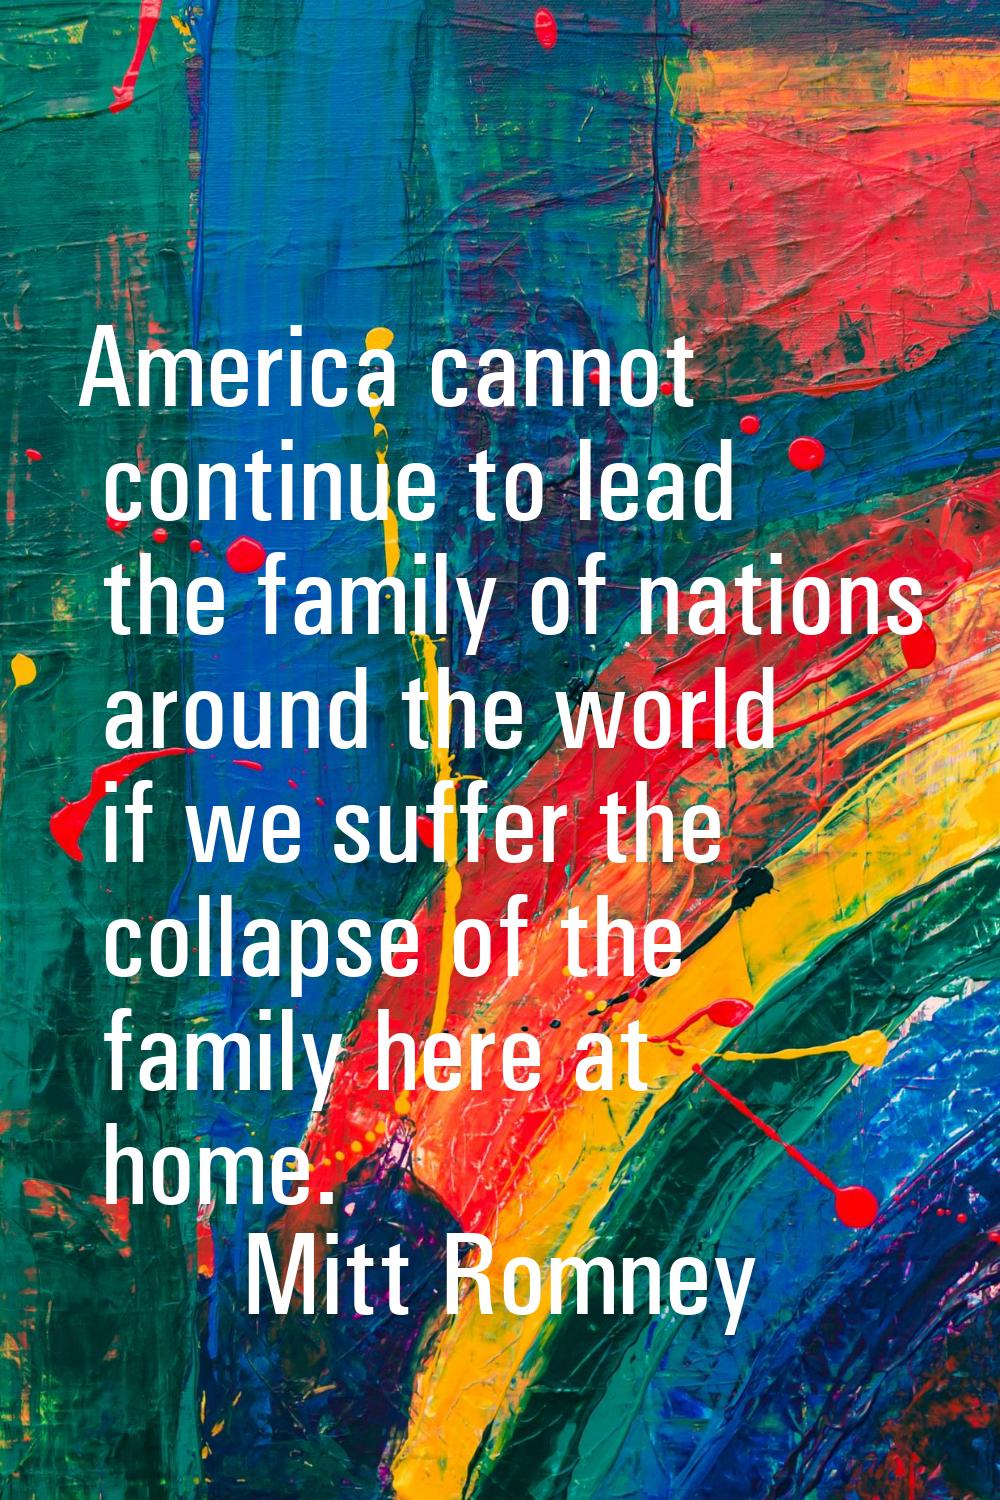 America cannot continue to lead the family of nations around the world if we suffer the collapse of